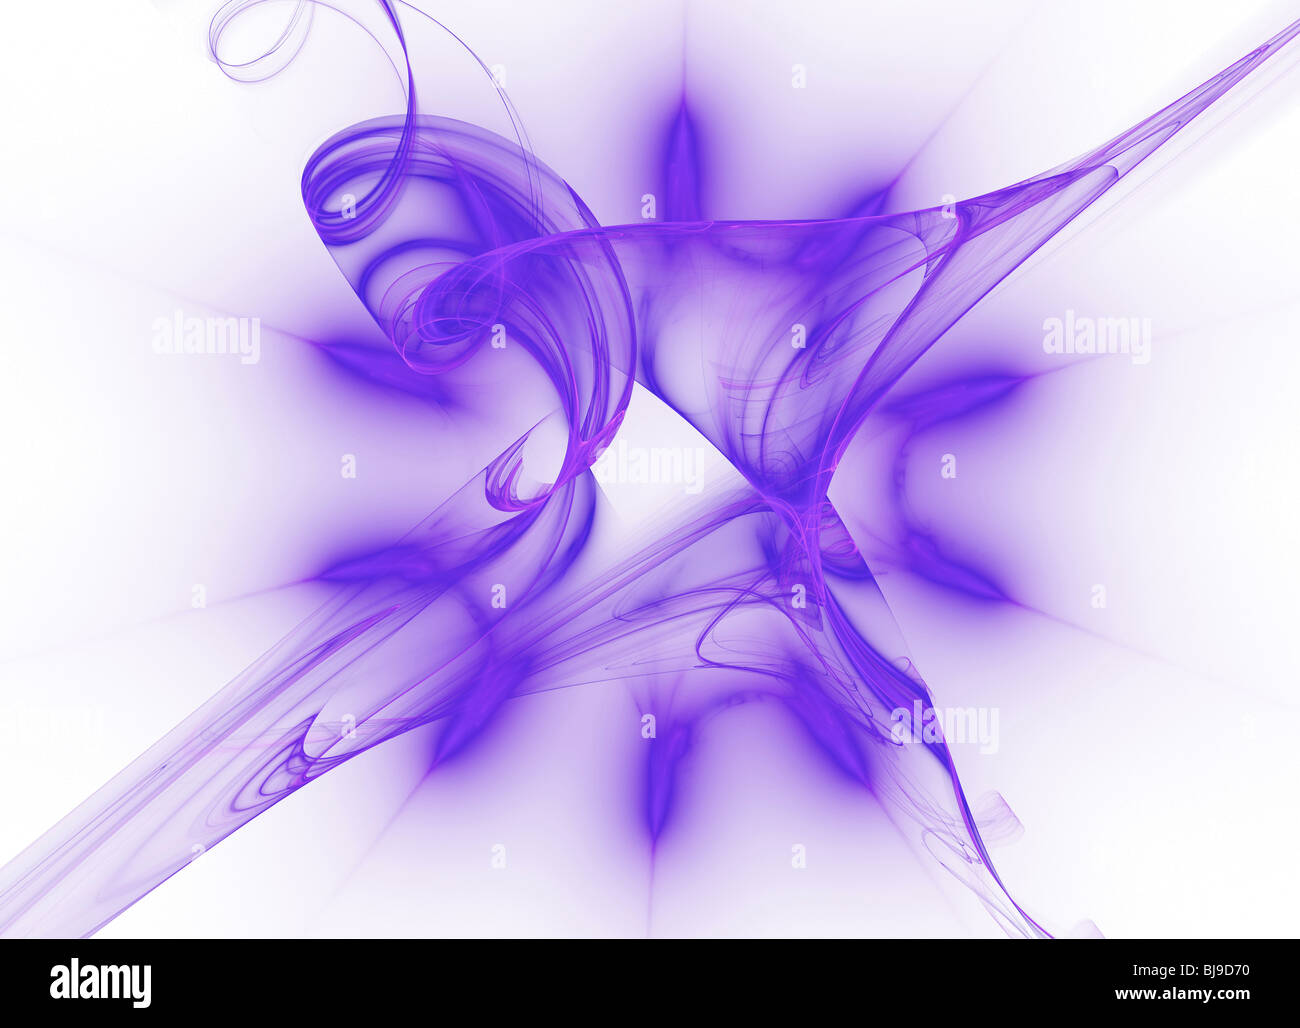 Abstract fractal element for design Stock Photo